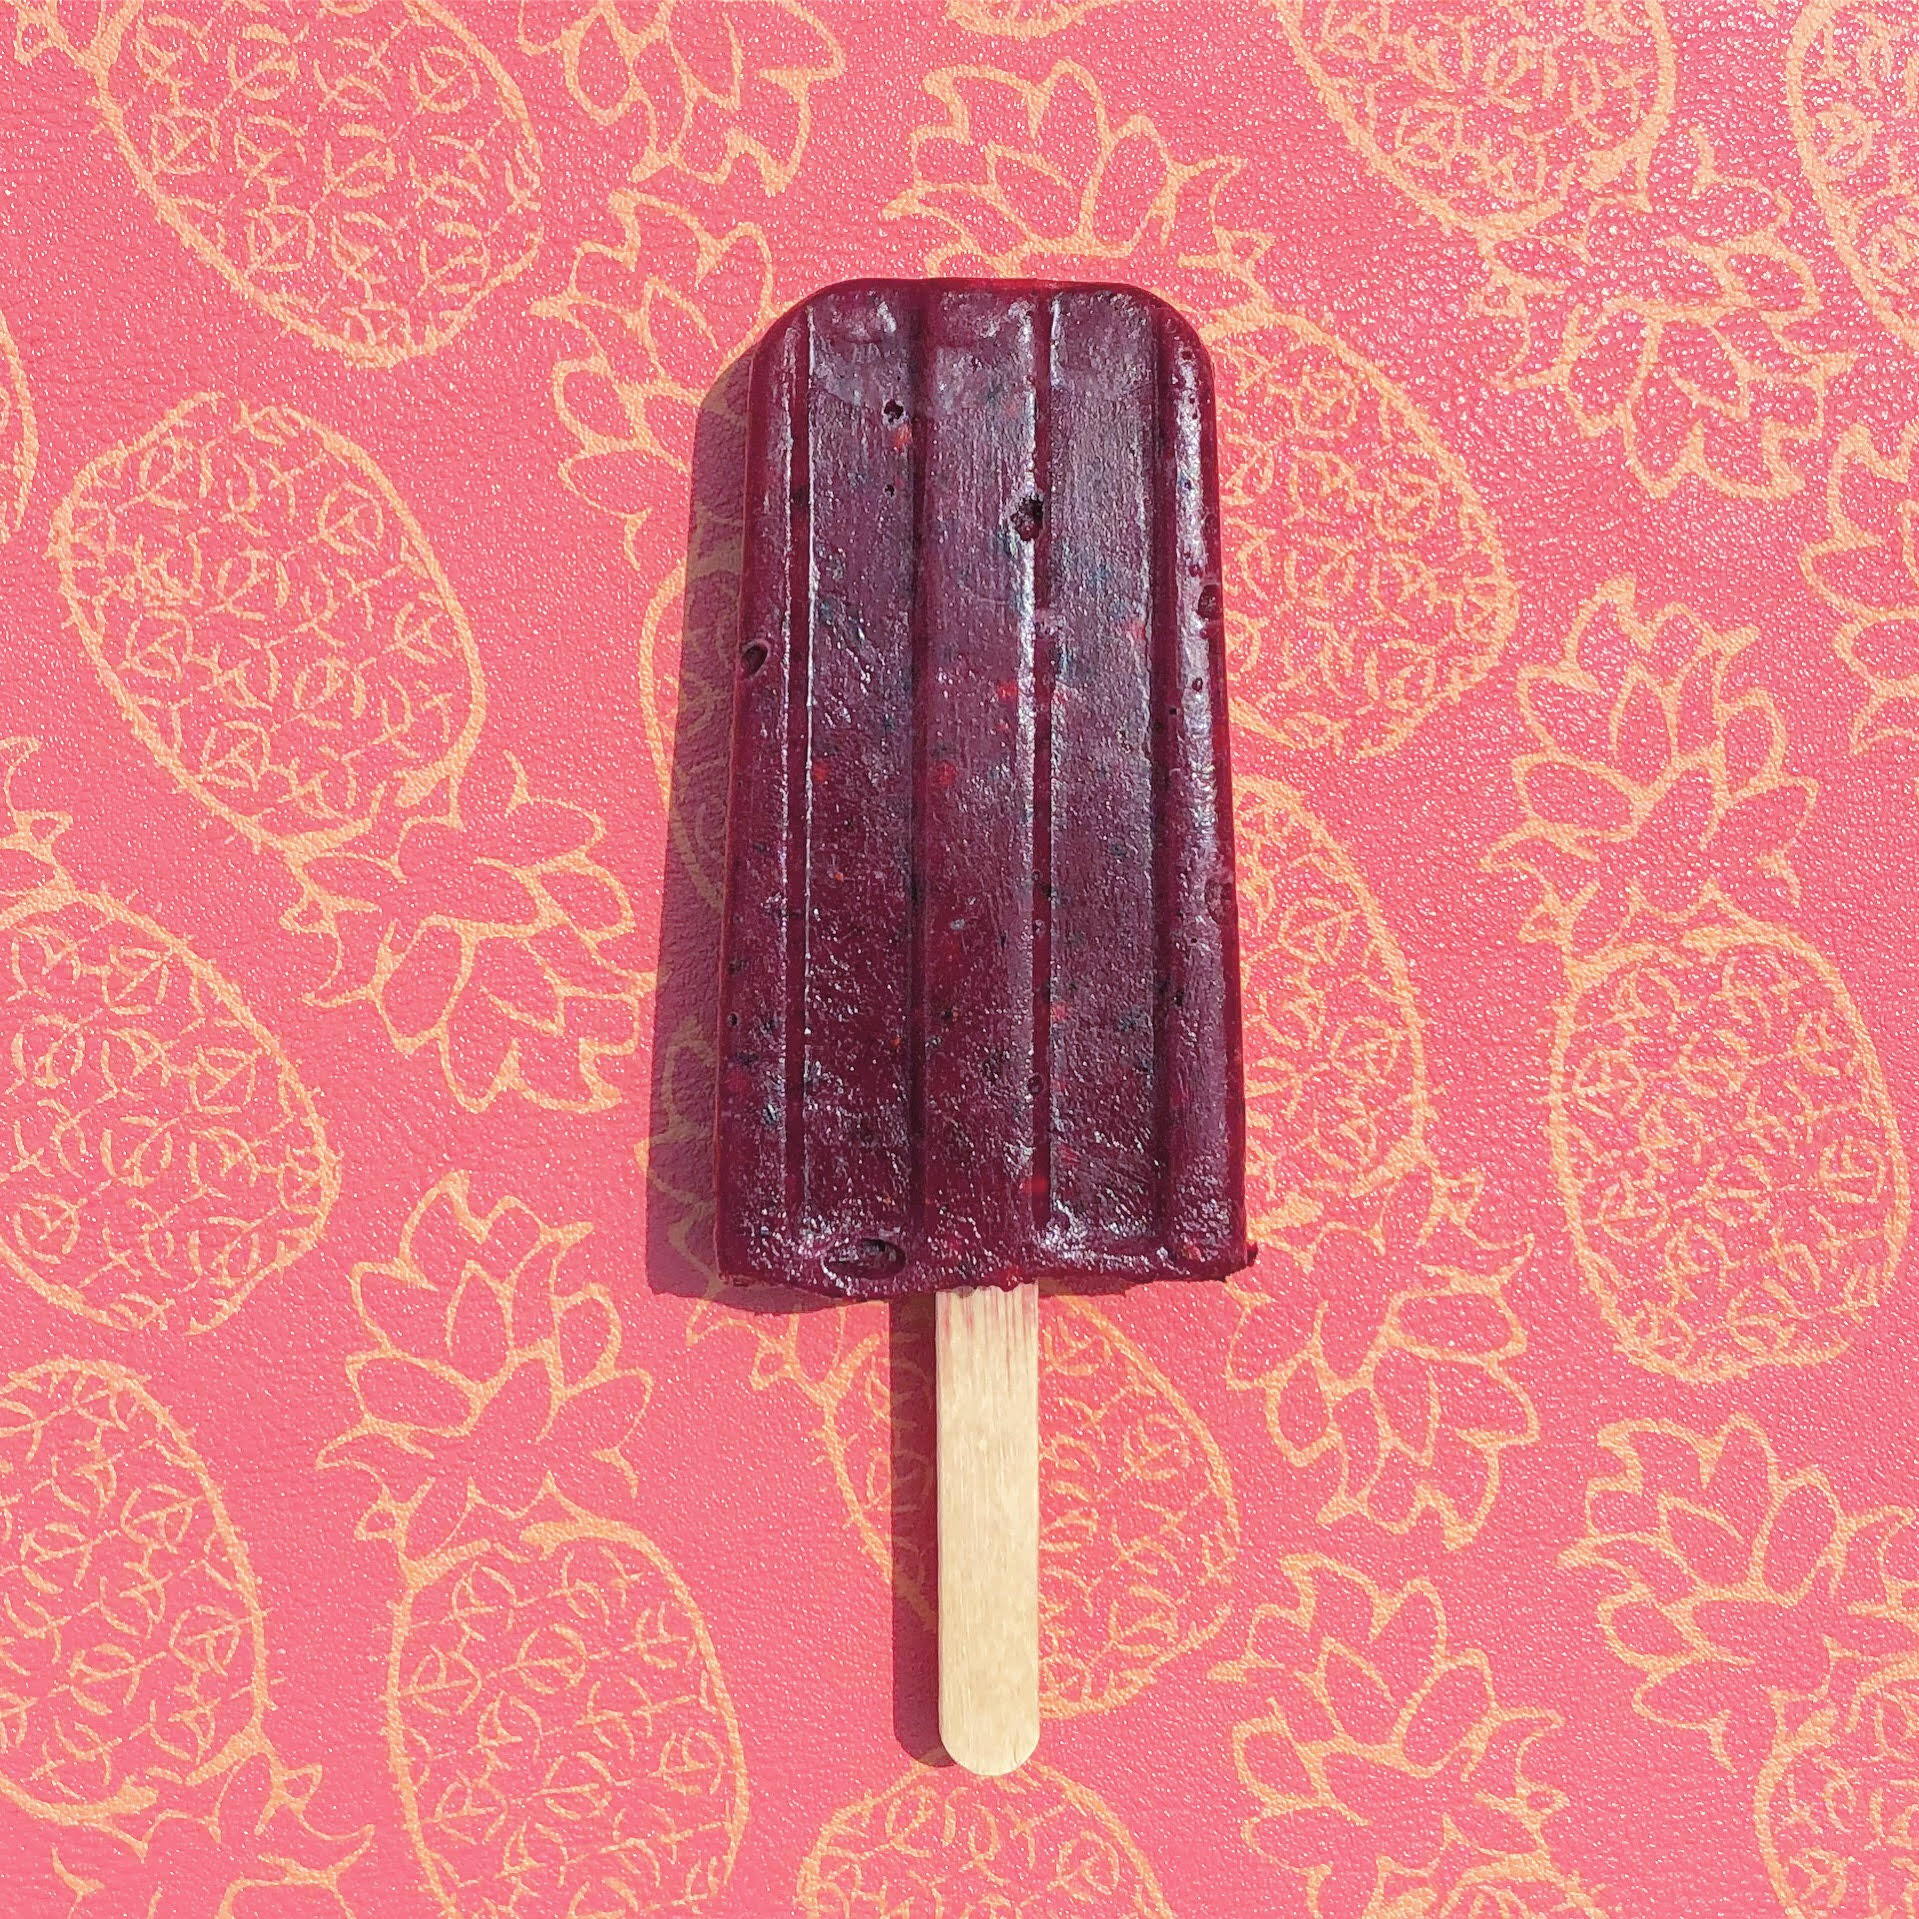 Raspberry Pineapple ice pop from The Frosty Pineapple in Windsor, Ontario.